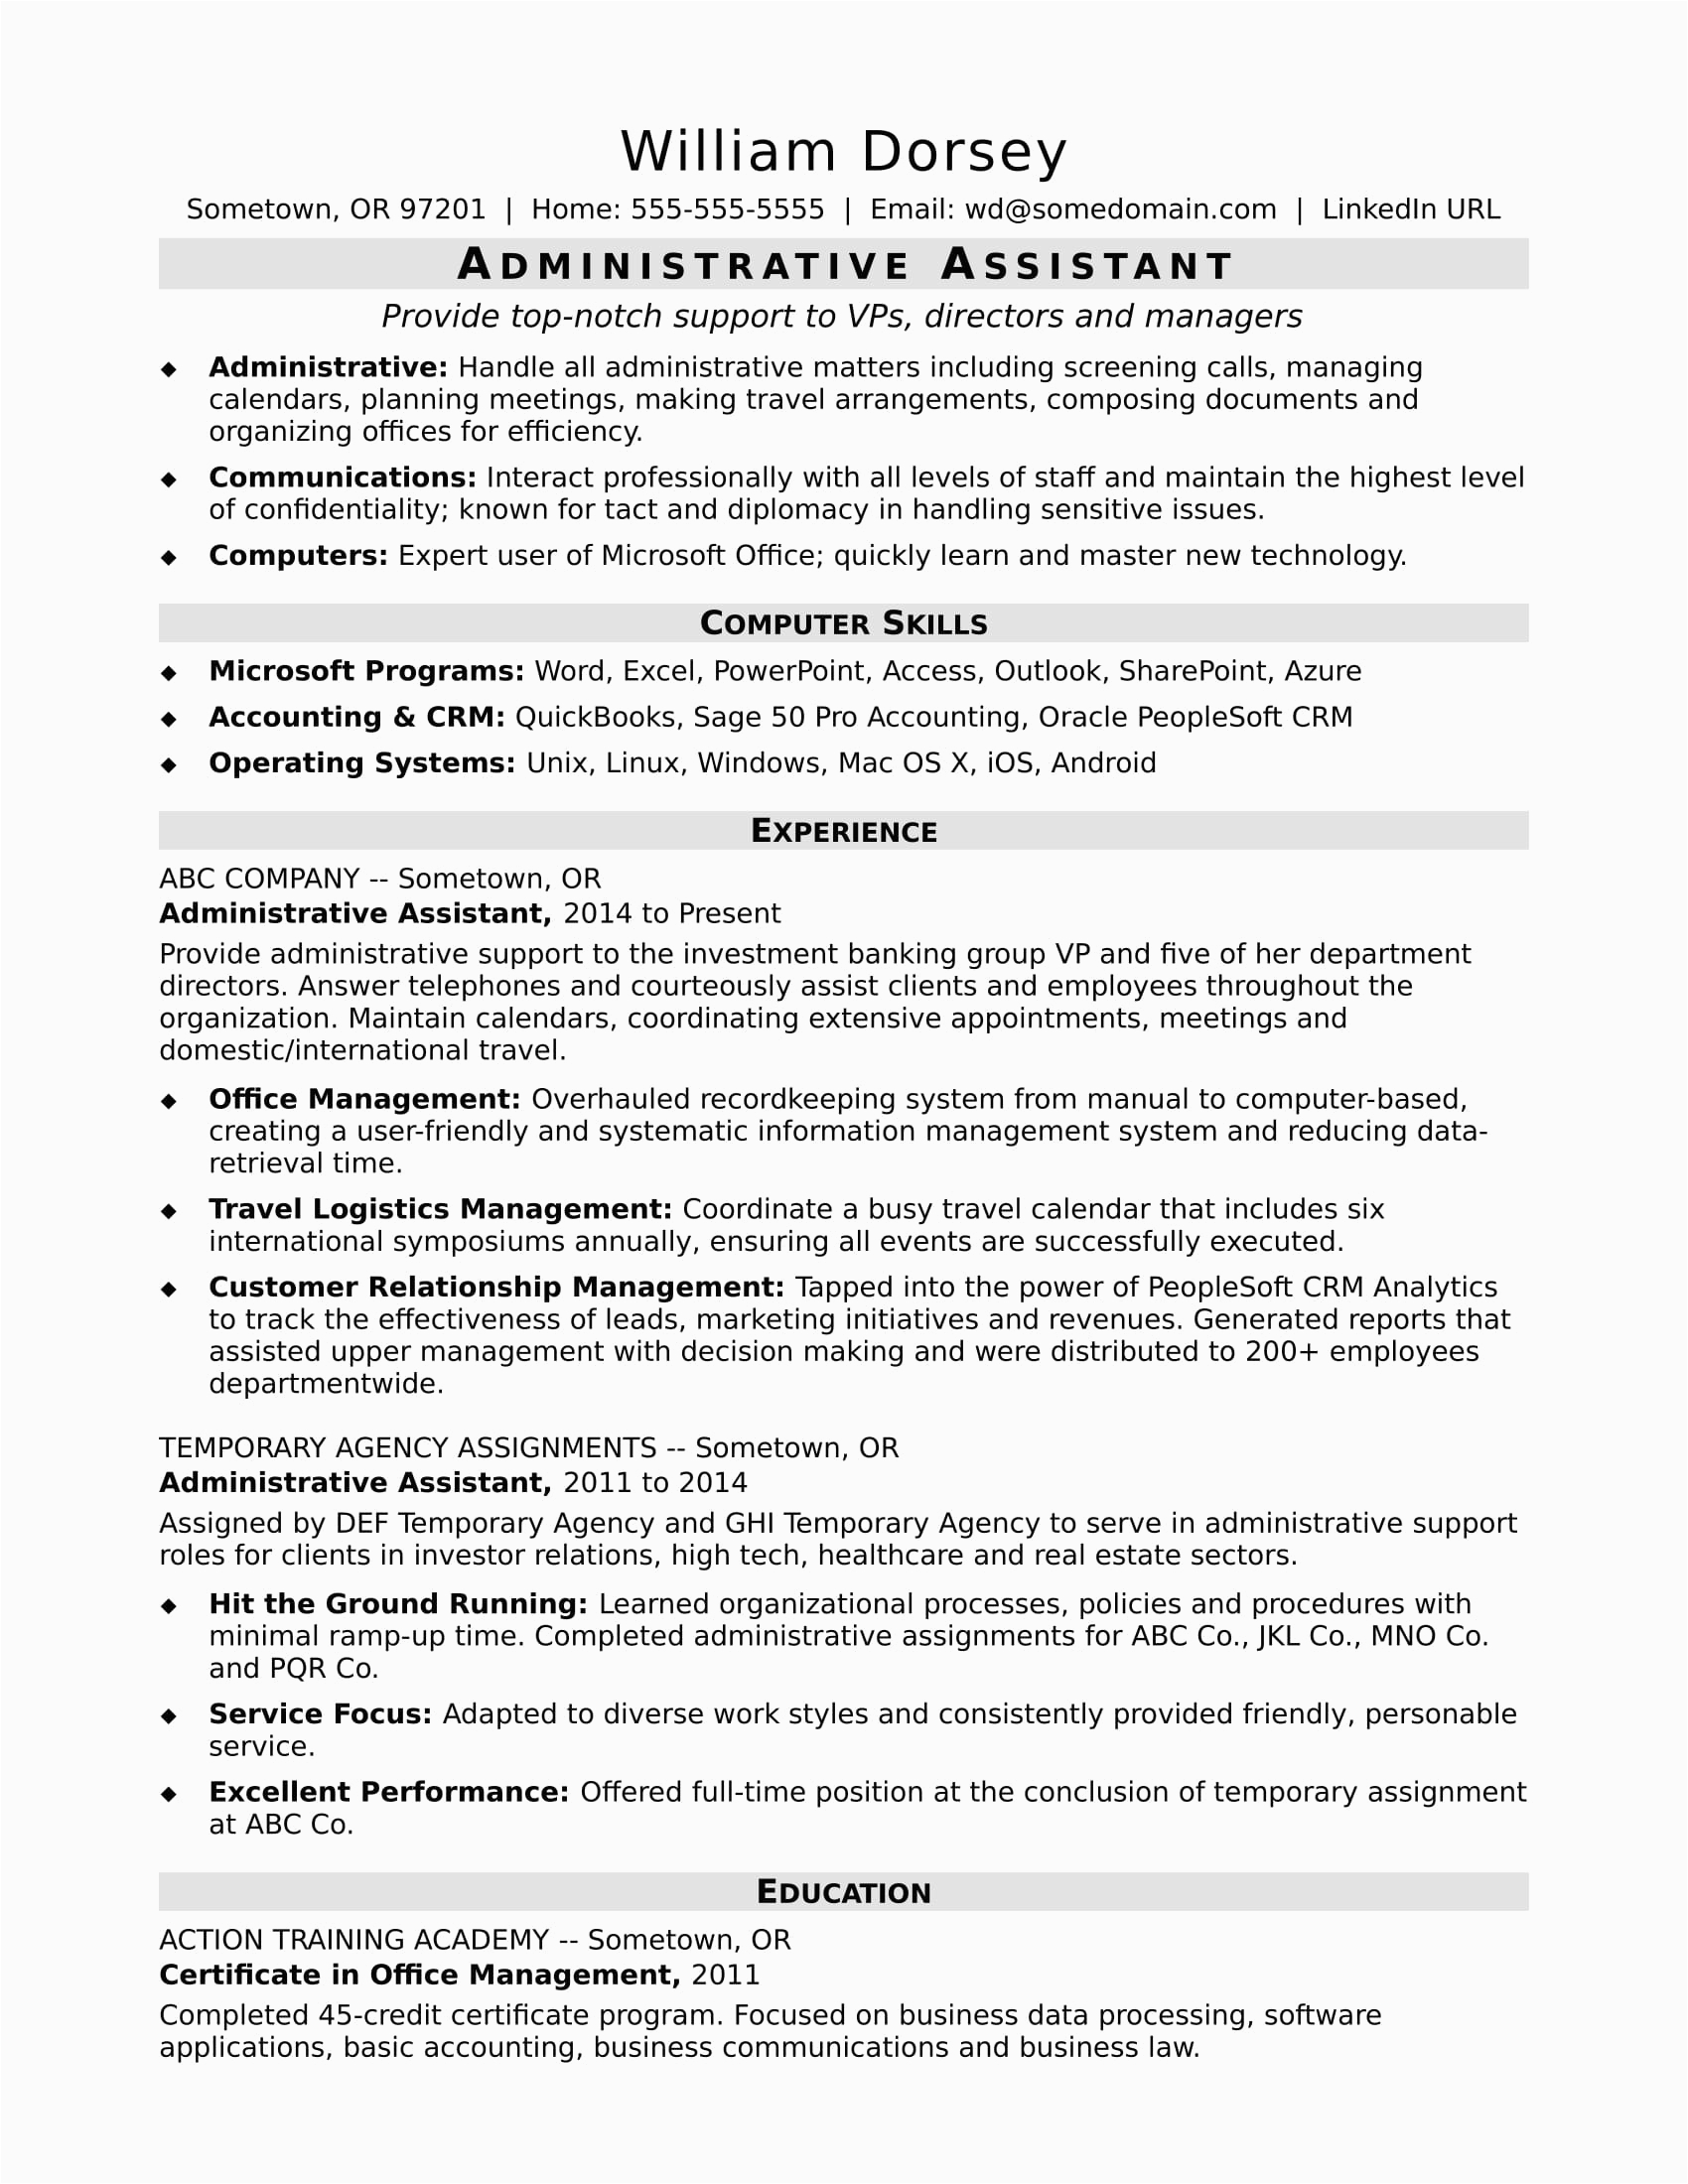 Resume Profile Samples for Admin assistant Midlevel Administrative assistant Resume Sample